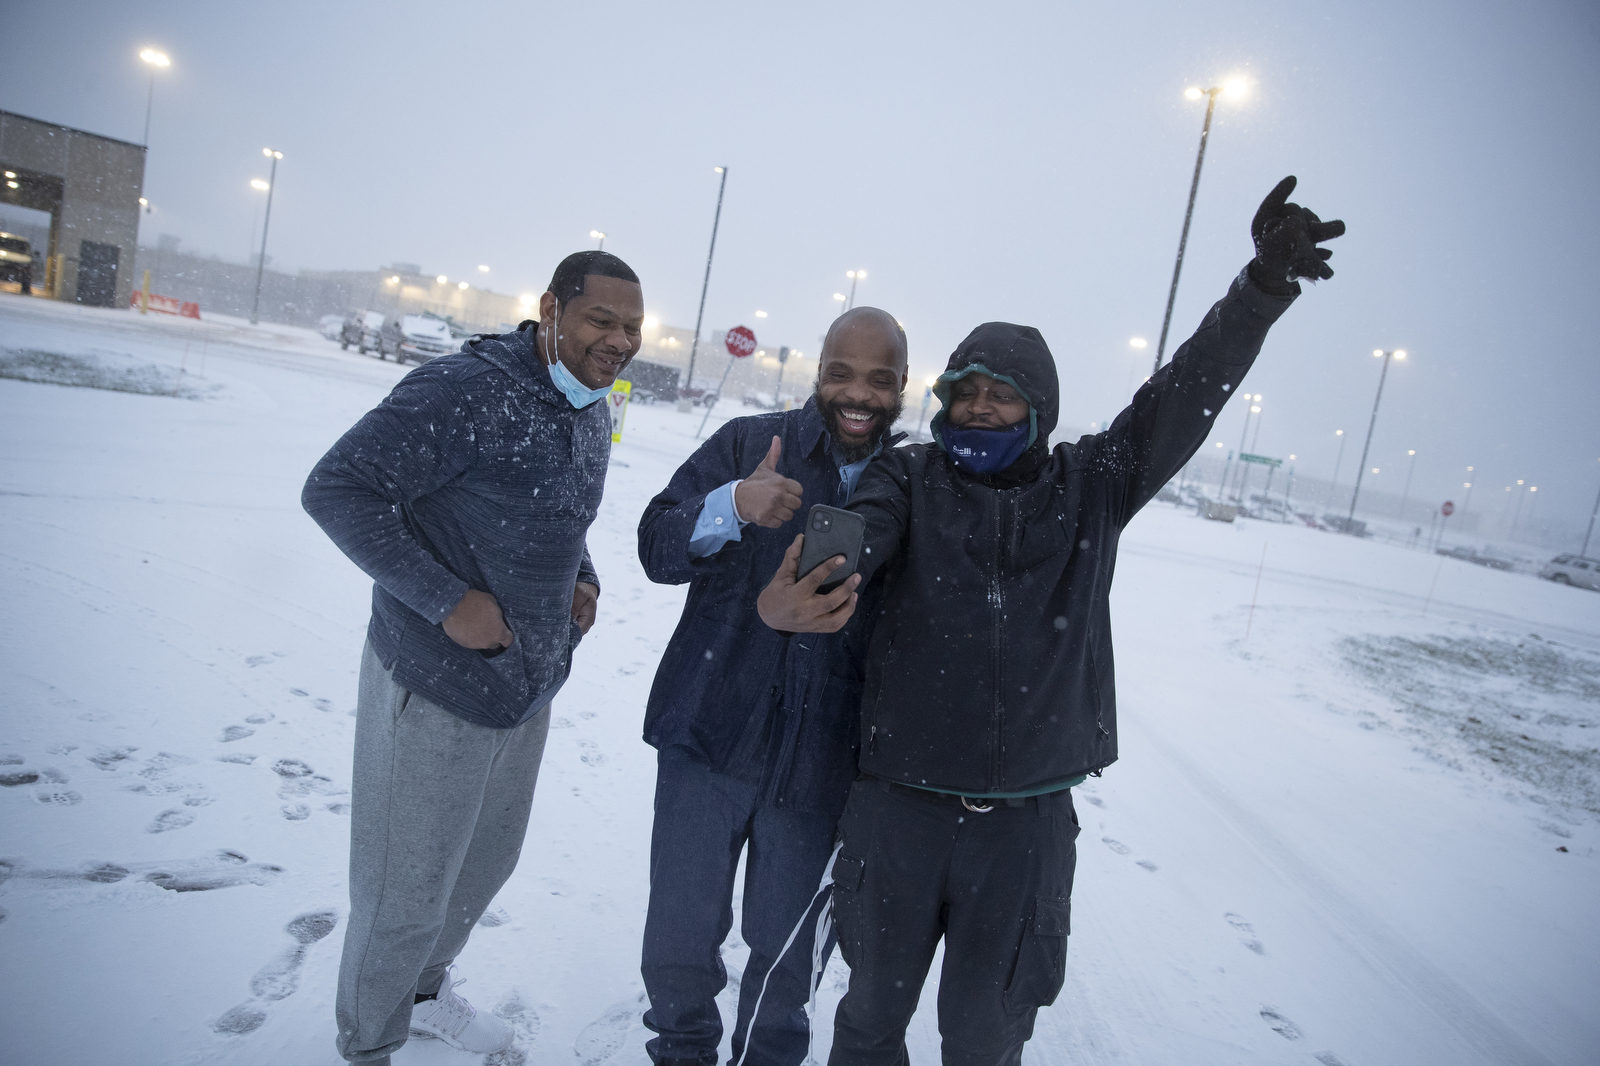 Termaine Hicks was released from SCI Phoenix Prison Tuesday, Dec.16, 2020 in Collegeville, Penn. after a wrongful incarceration for 19 years. His brothers Tone Hicks and Tyron McClendon was there to greet him upon release. (Jason E. Miczek/AP Images for The Innocence Project)